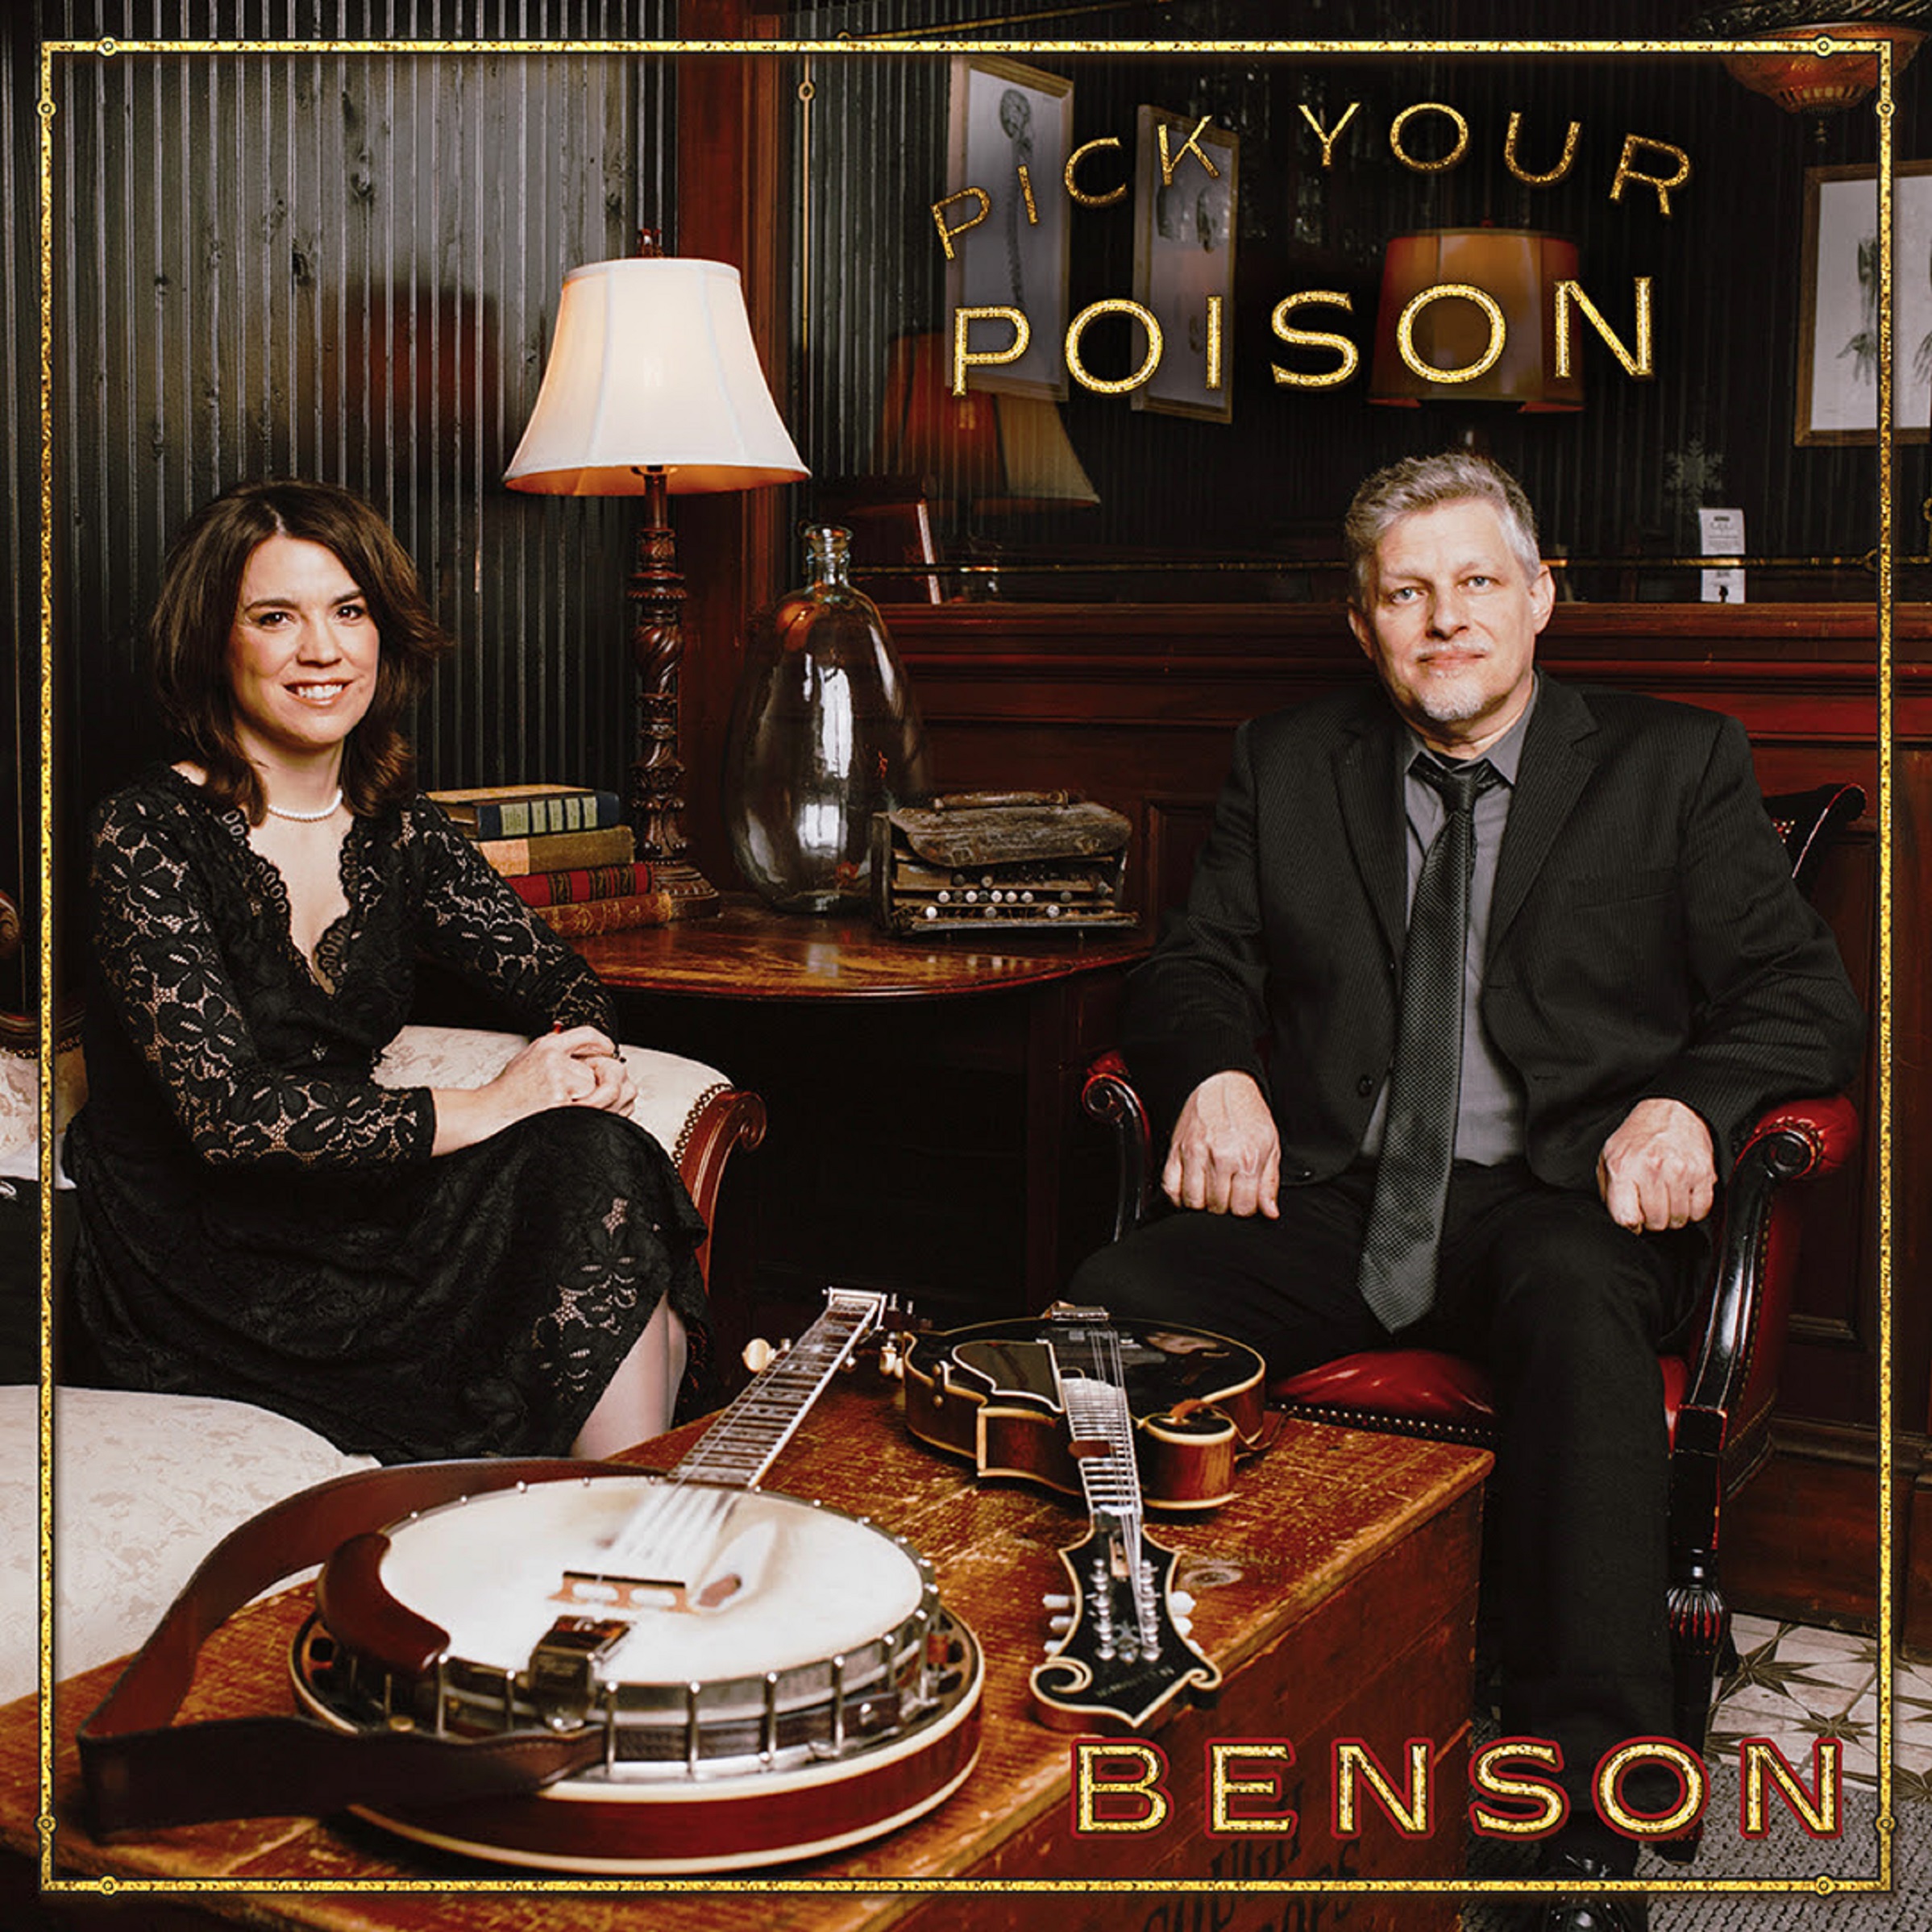 Benson’s Pick Your Poison shows off the duo's artistic depth